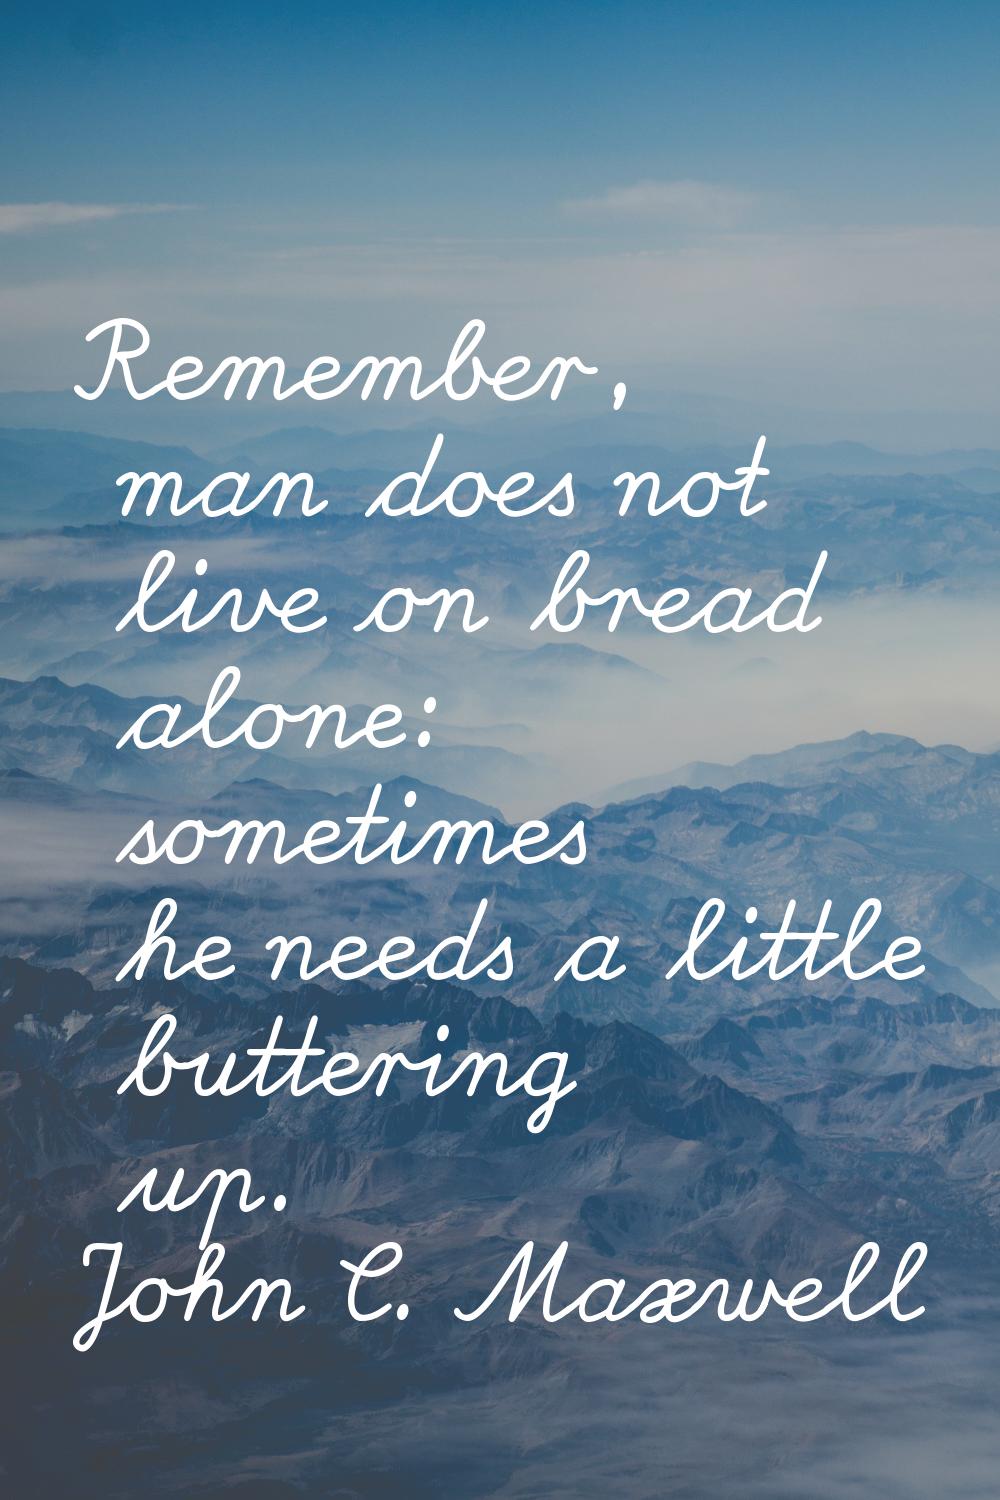 Remember, man does not live on bread alone: sometimes he needs a little buttering up.